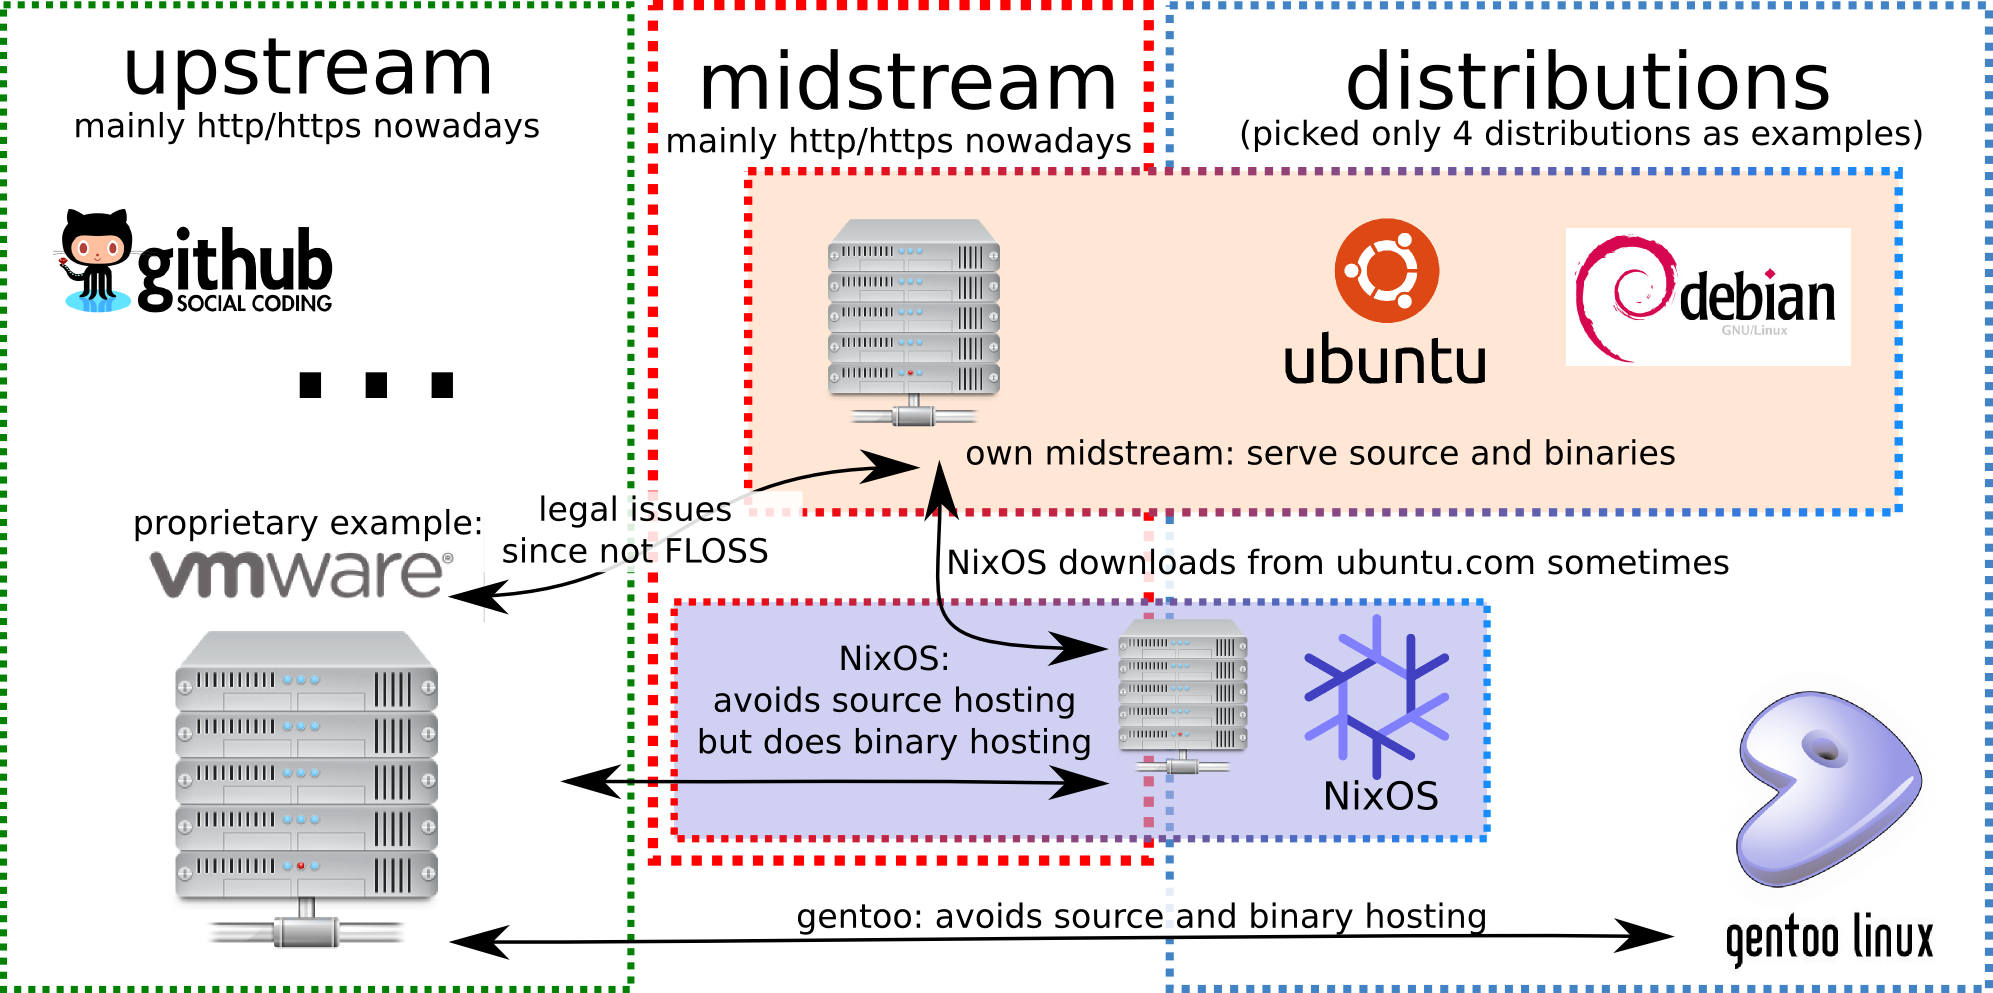 source and binary deployment